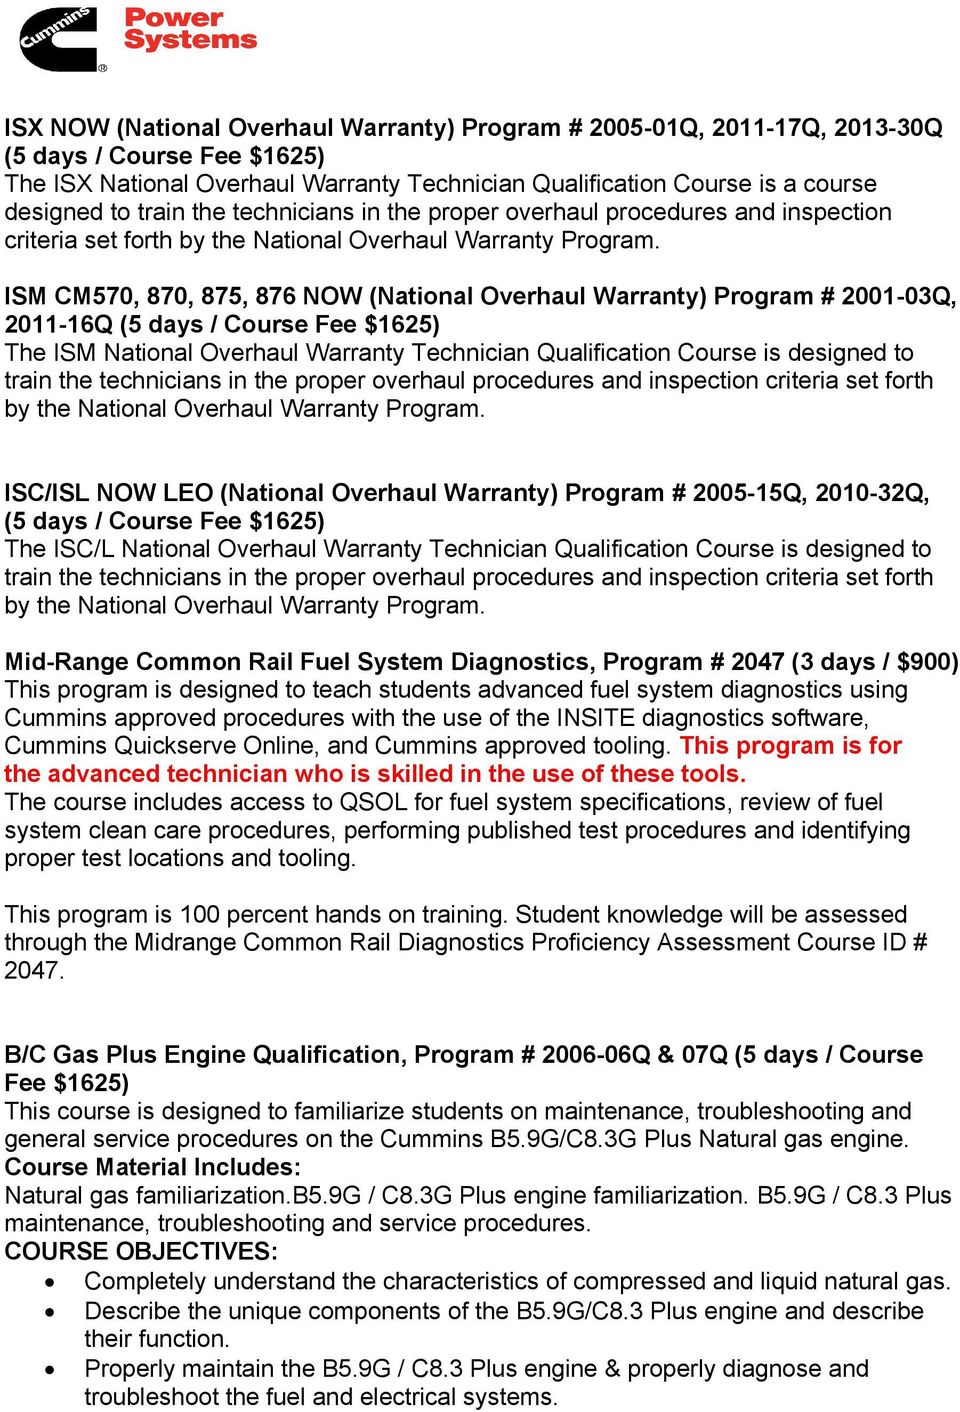 ISM CM570, 870, 875, 876 NOW (National Overhaul Warranty) Program # 2001-03Q, 2011-16Q (5 days / Course The ISM National Overhaul Warranty Technician Qualification Course is designed to train the 